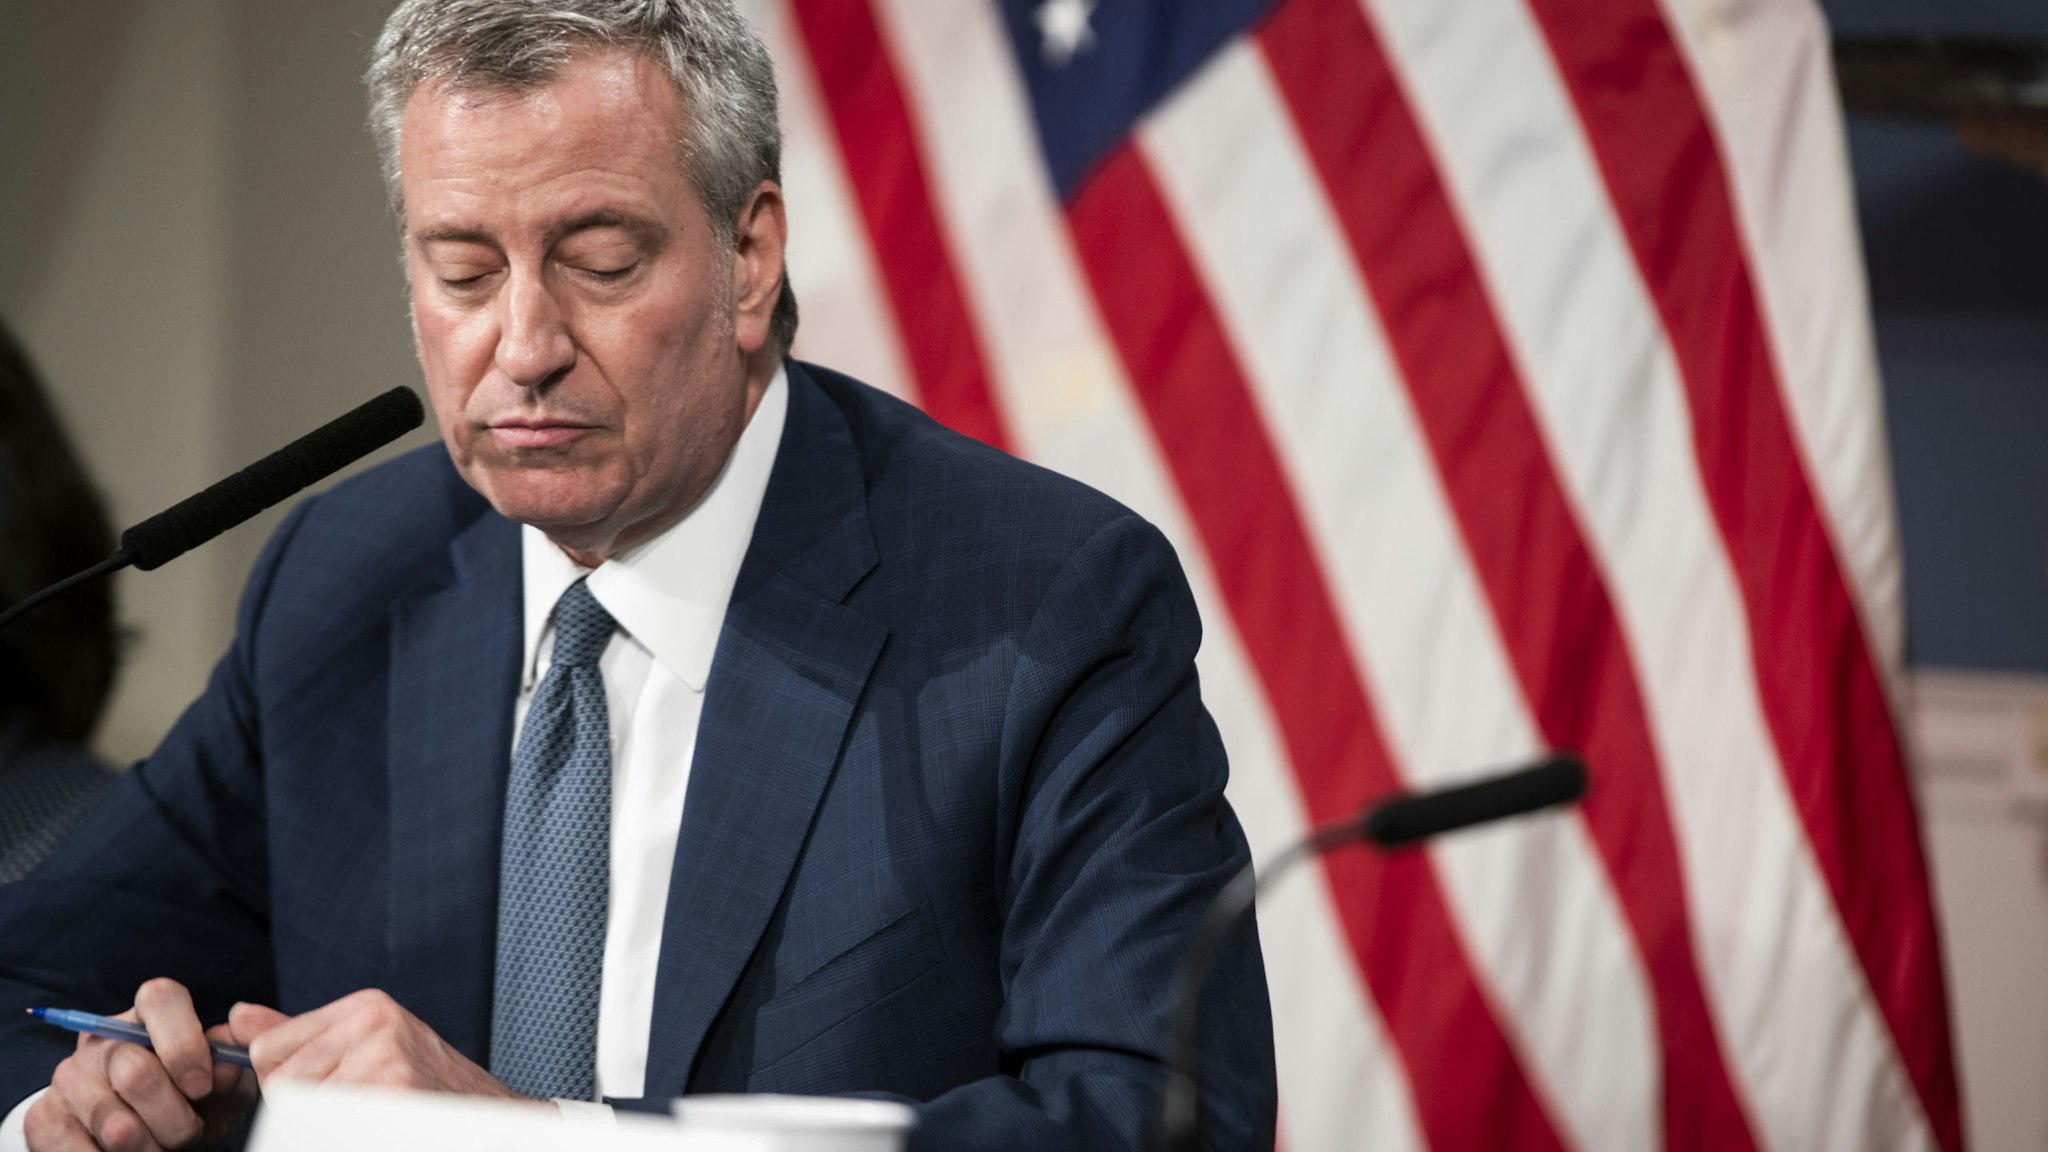 Bill de Blasio, mayor of New York, pauses while speaking during a news conference on COVID-19 in New York, U.S., on Friday, March 13, 2020. On Thursday, Mayor de Blasio declared a state of emergency for New York City, saying the city would work with the state to enforce its decree against gatherings of more than 500 people to combat the new coronavirus outbreak. Photographer: Mark Kauzlarich/Bloomberg via Getty Images